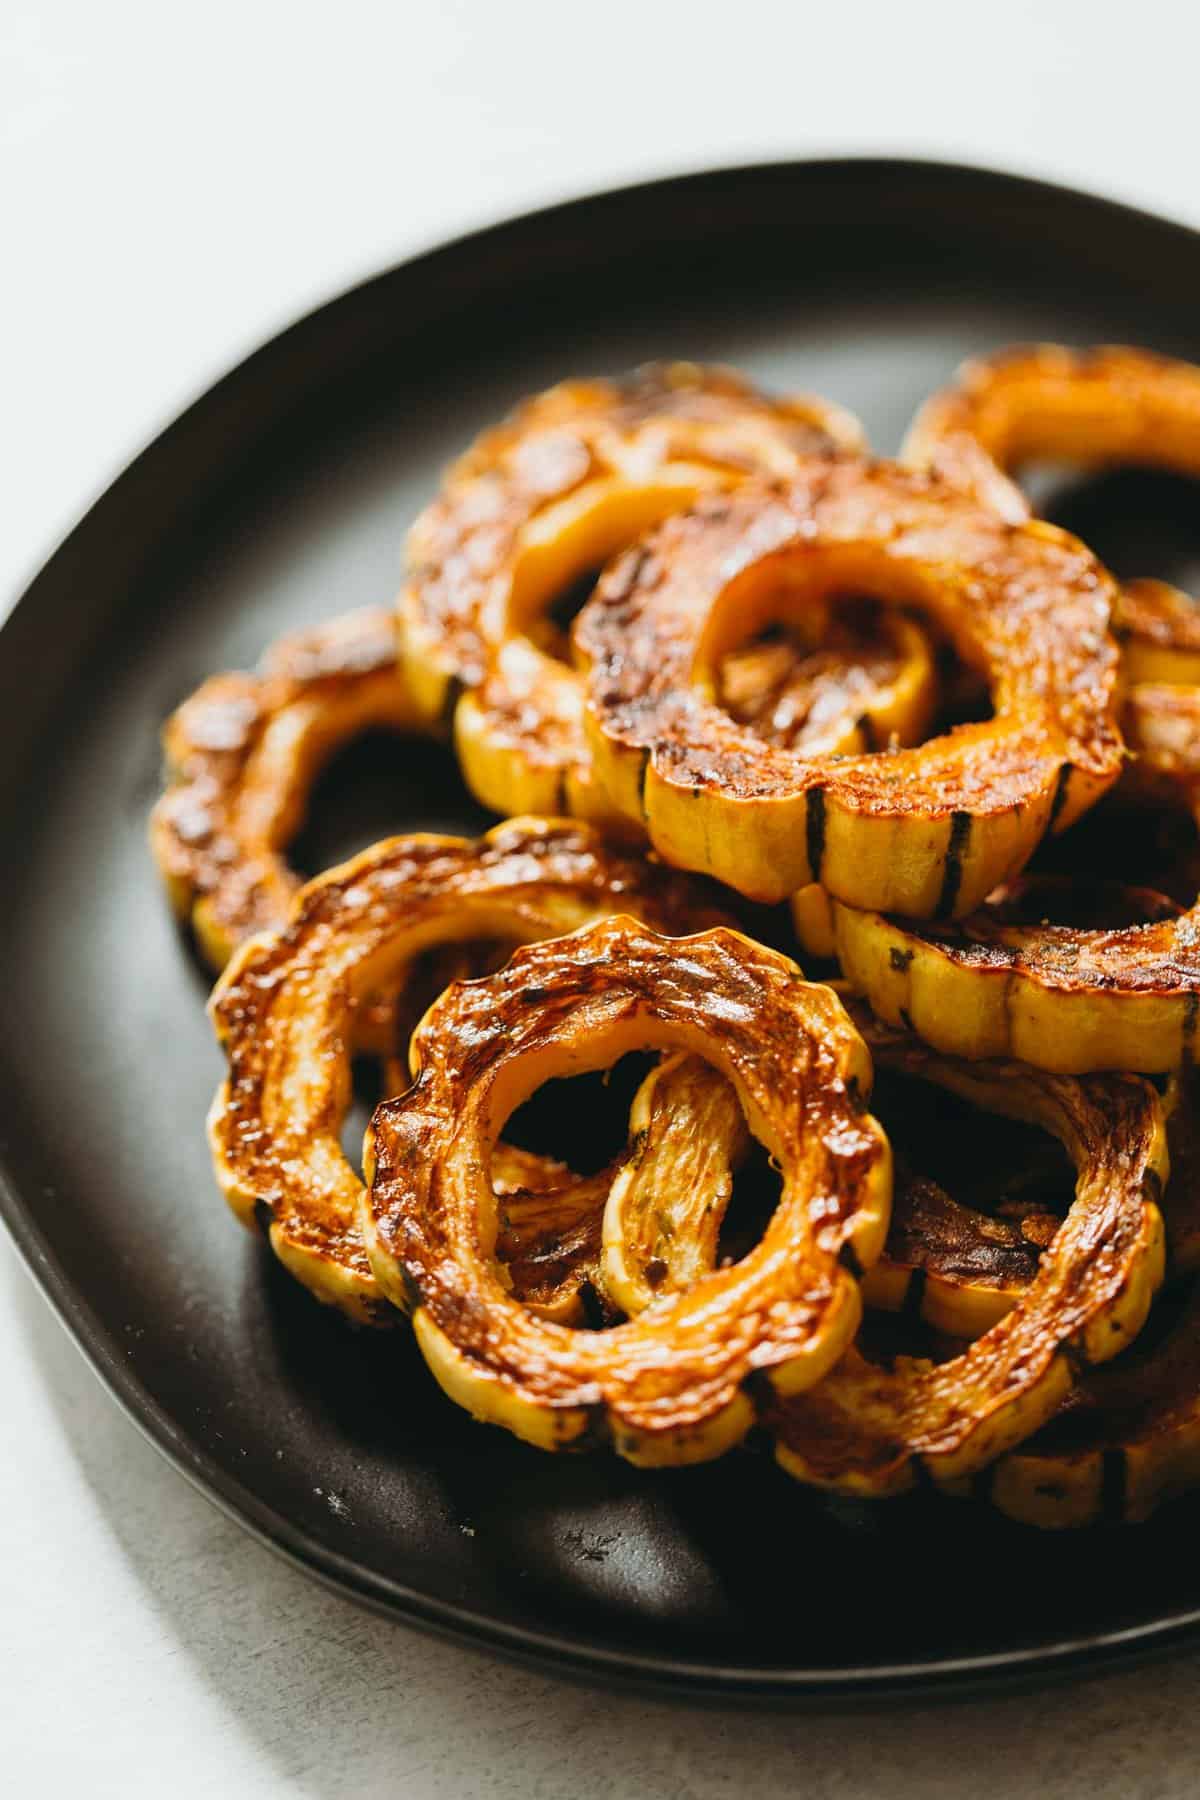 Rings of roasted delicata squash layered on a black plate